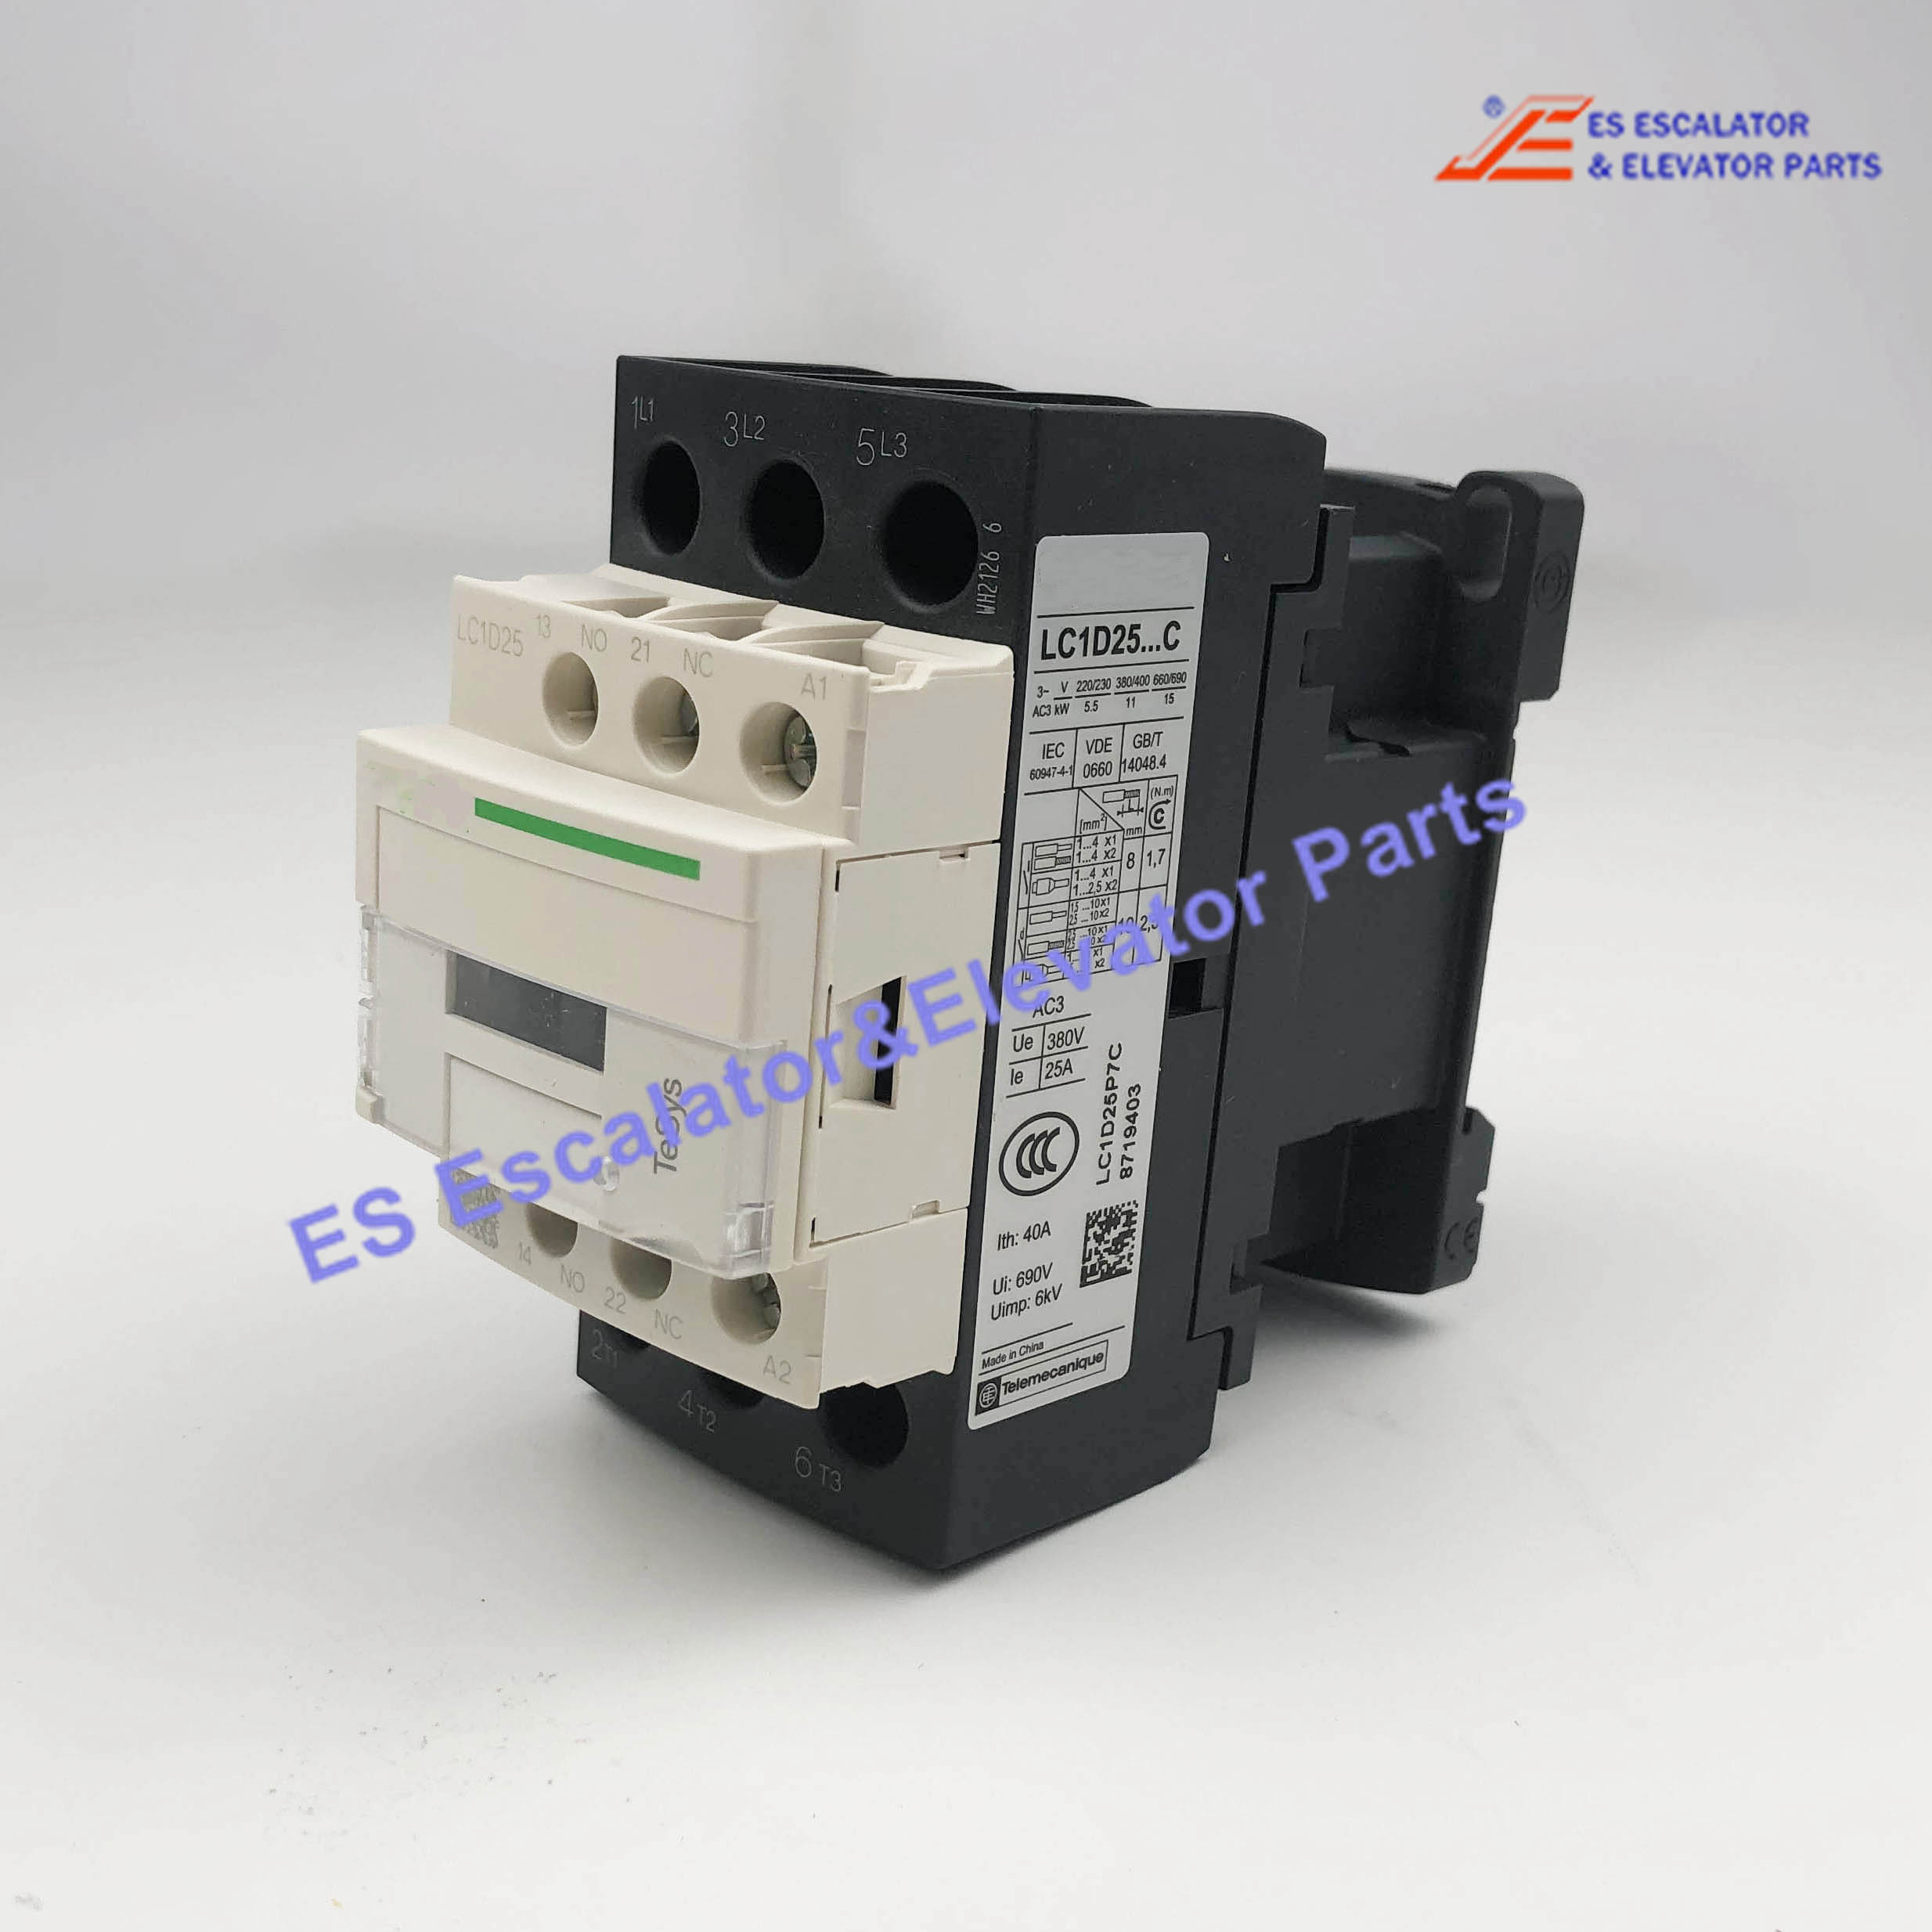 LC1D25 Elevator Auxiliary Contact Block Electric Contactor 230V 50/60HZ Use For Schneider